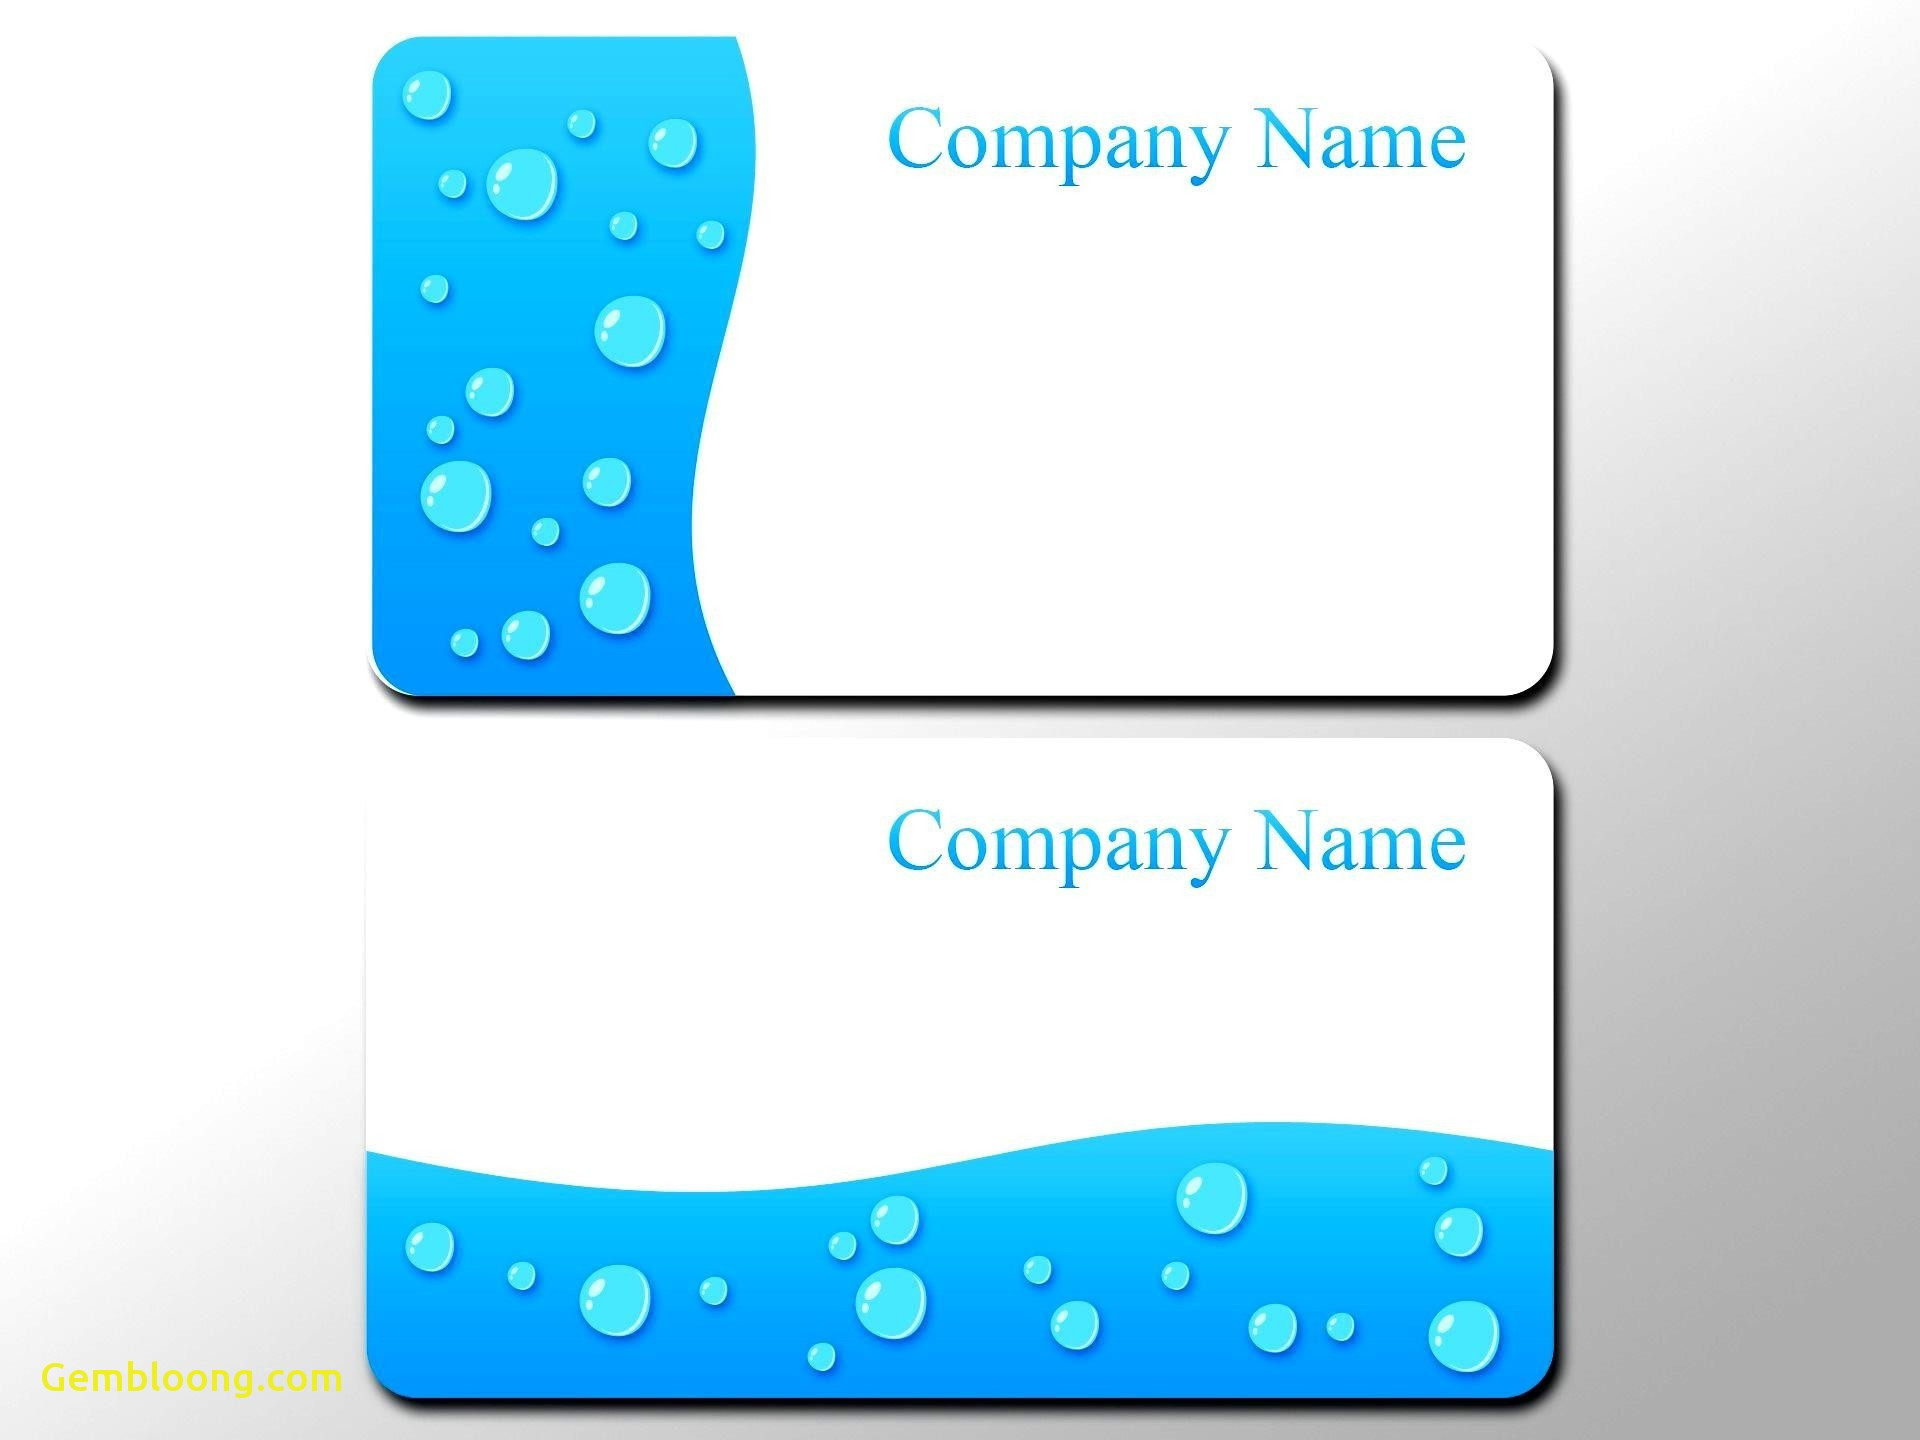 Business Card Photoshop Template Psd Awesome 016 Business Regarding Blank Business Card Template Download